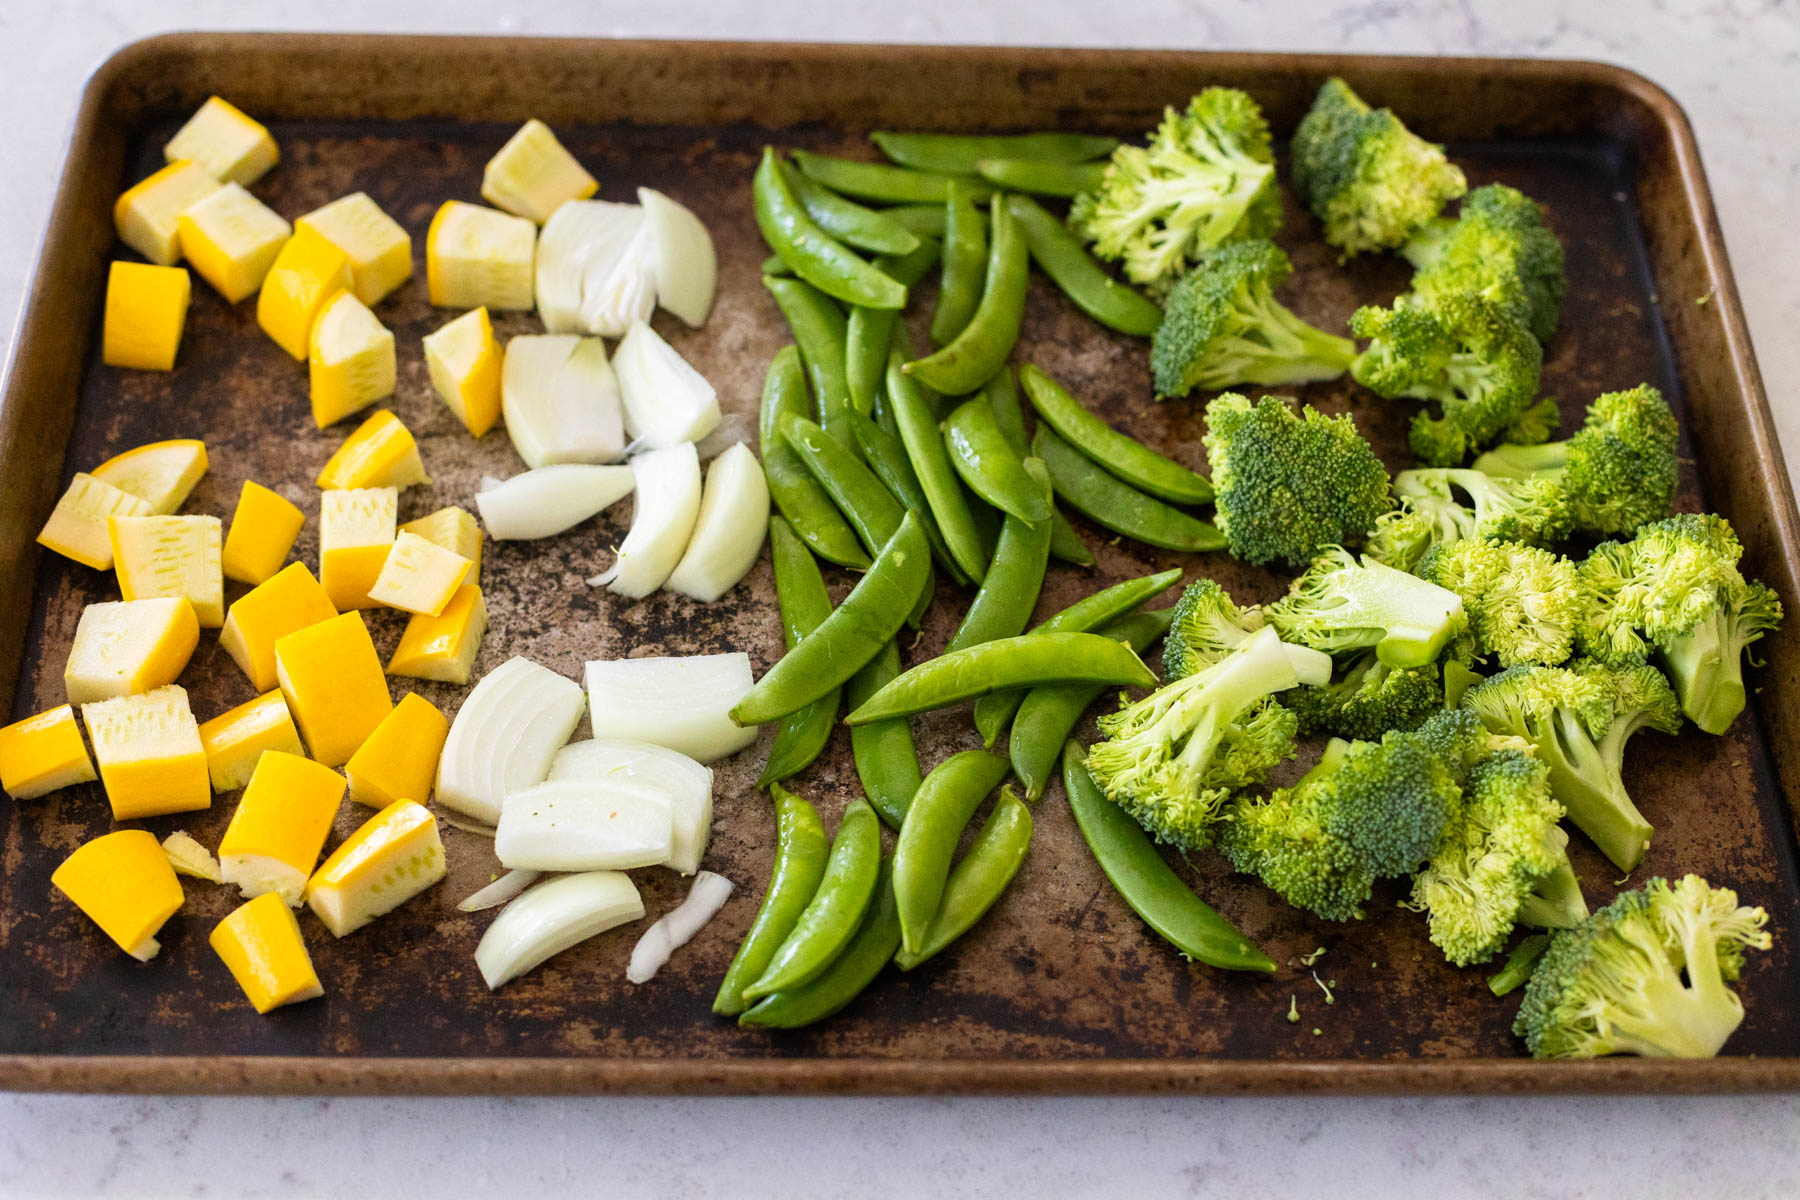 A sheet pan has yellow squash, onion, green peas, and broccoli florets arranged in neat rows. 